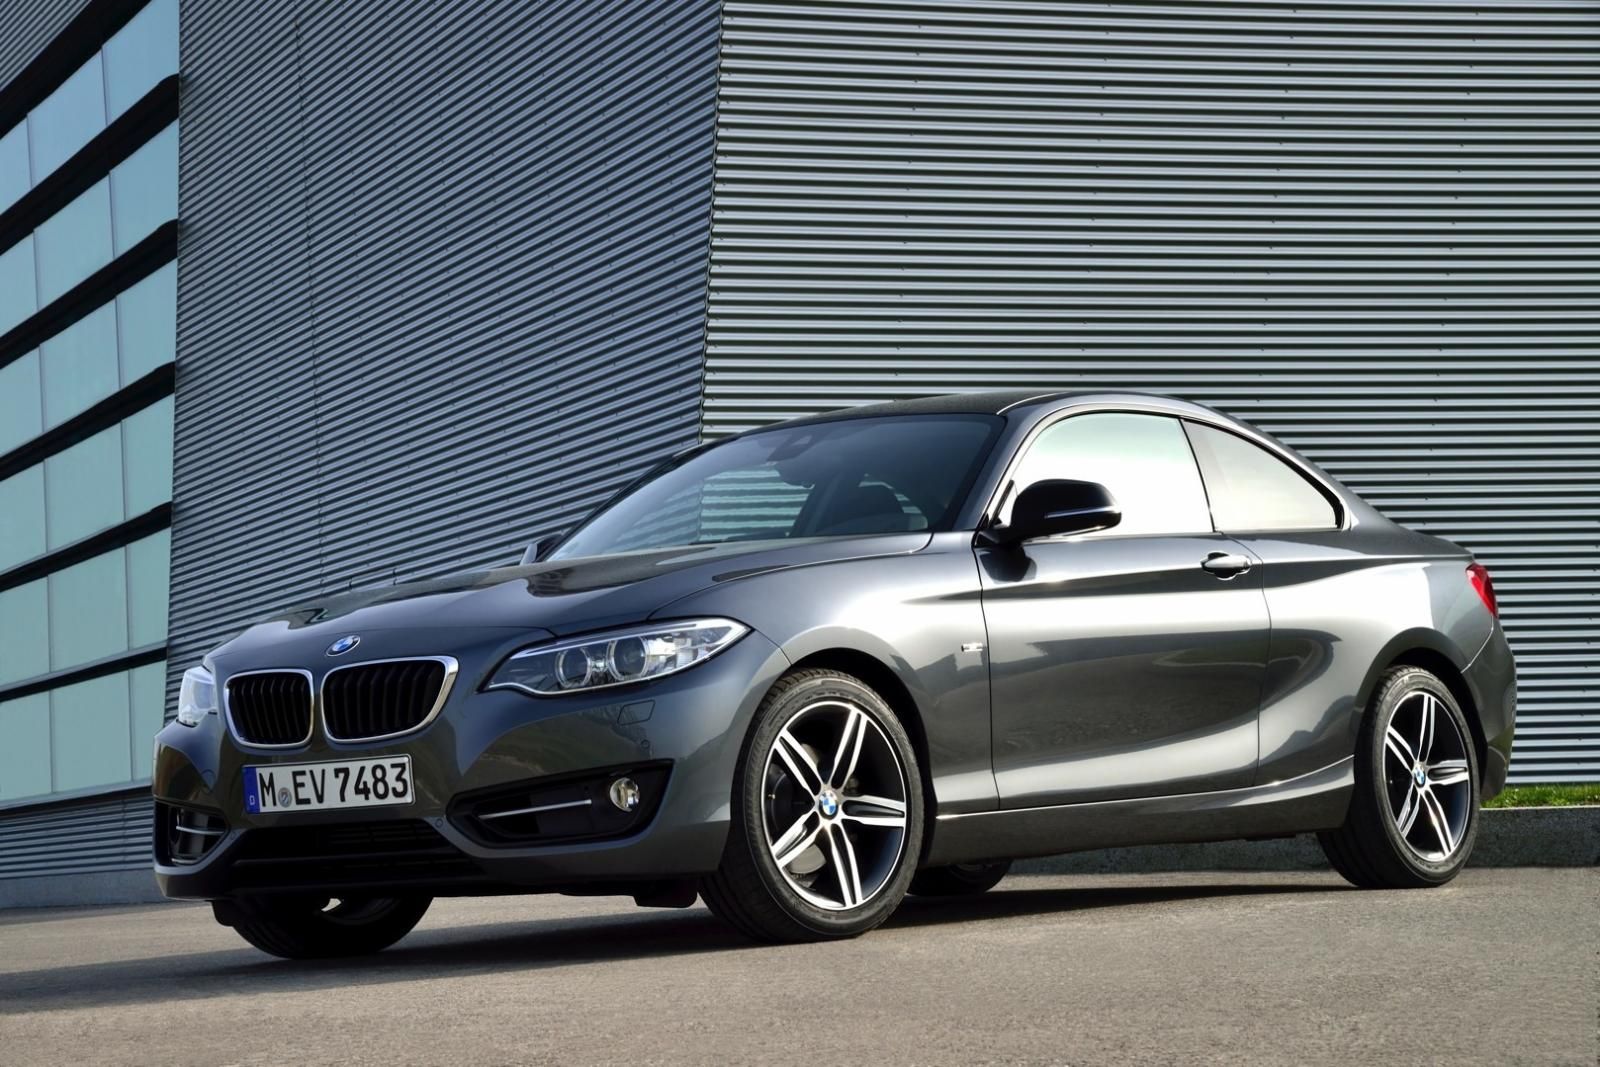 YEN 2015 BMW 220d COUPE RESM GALERS